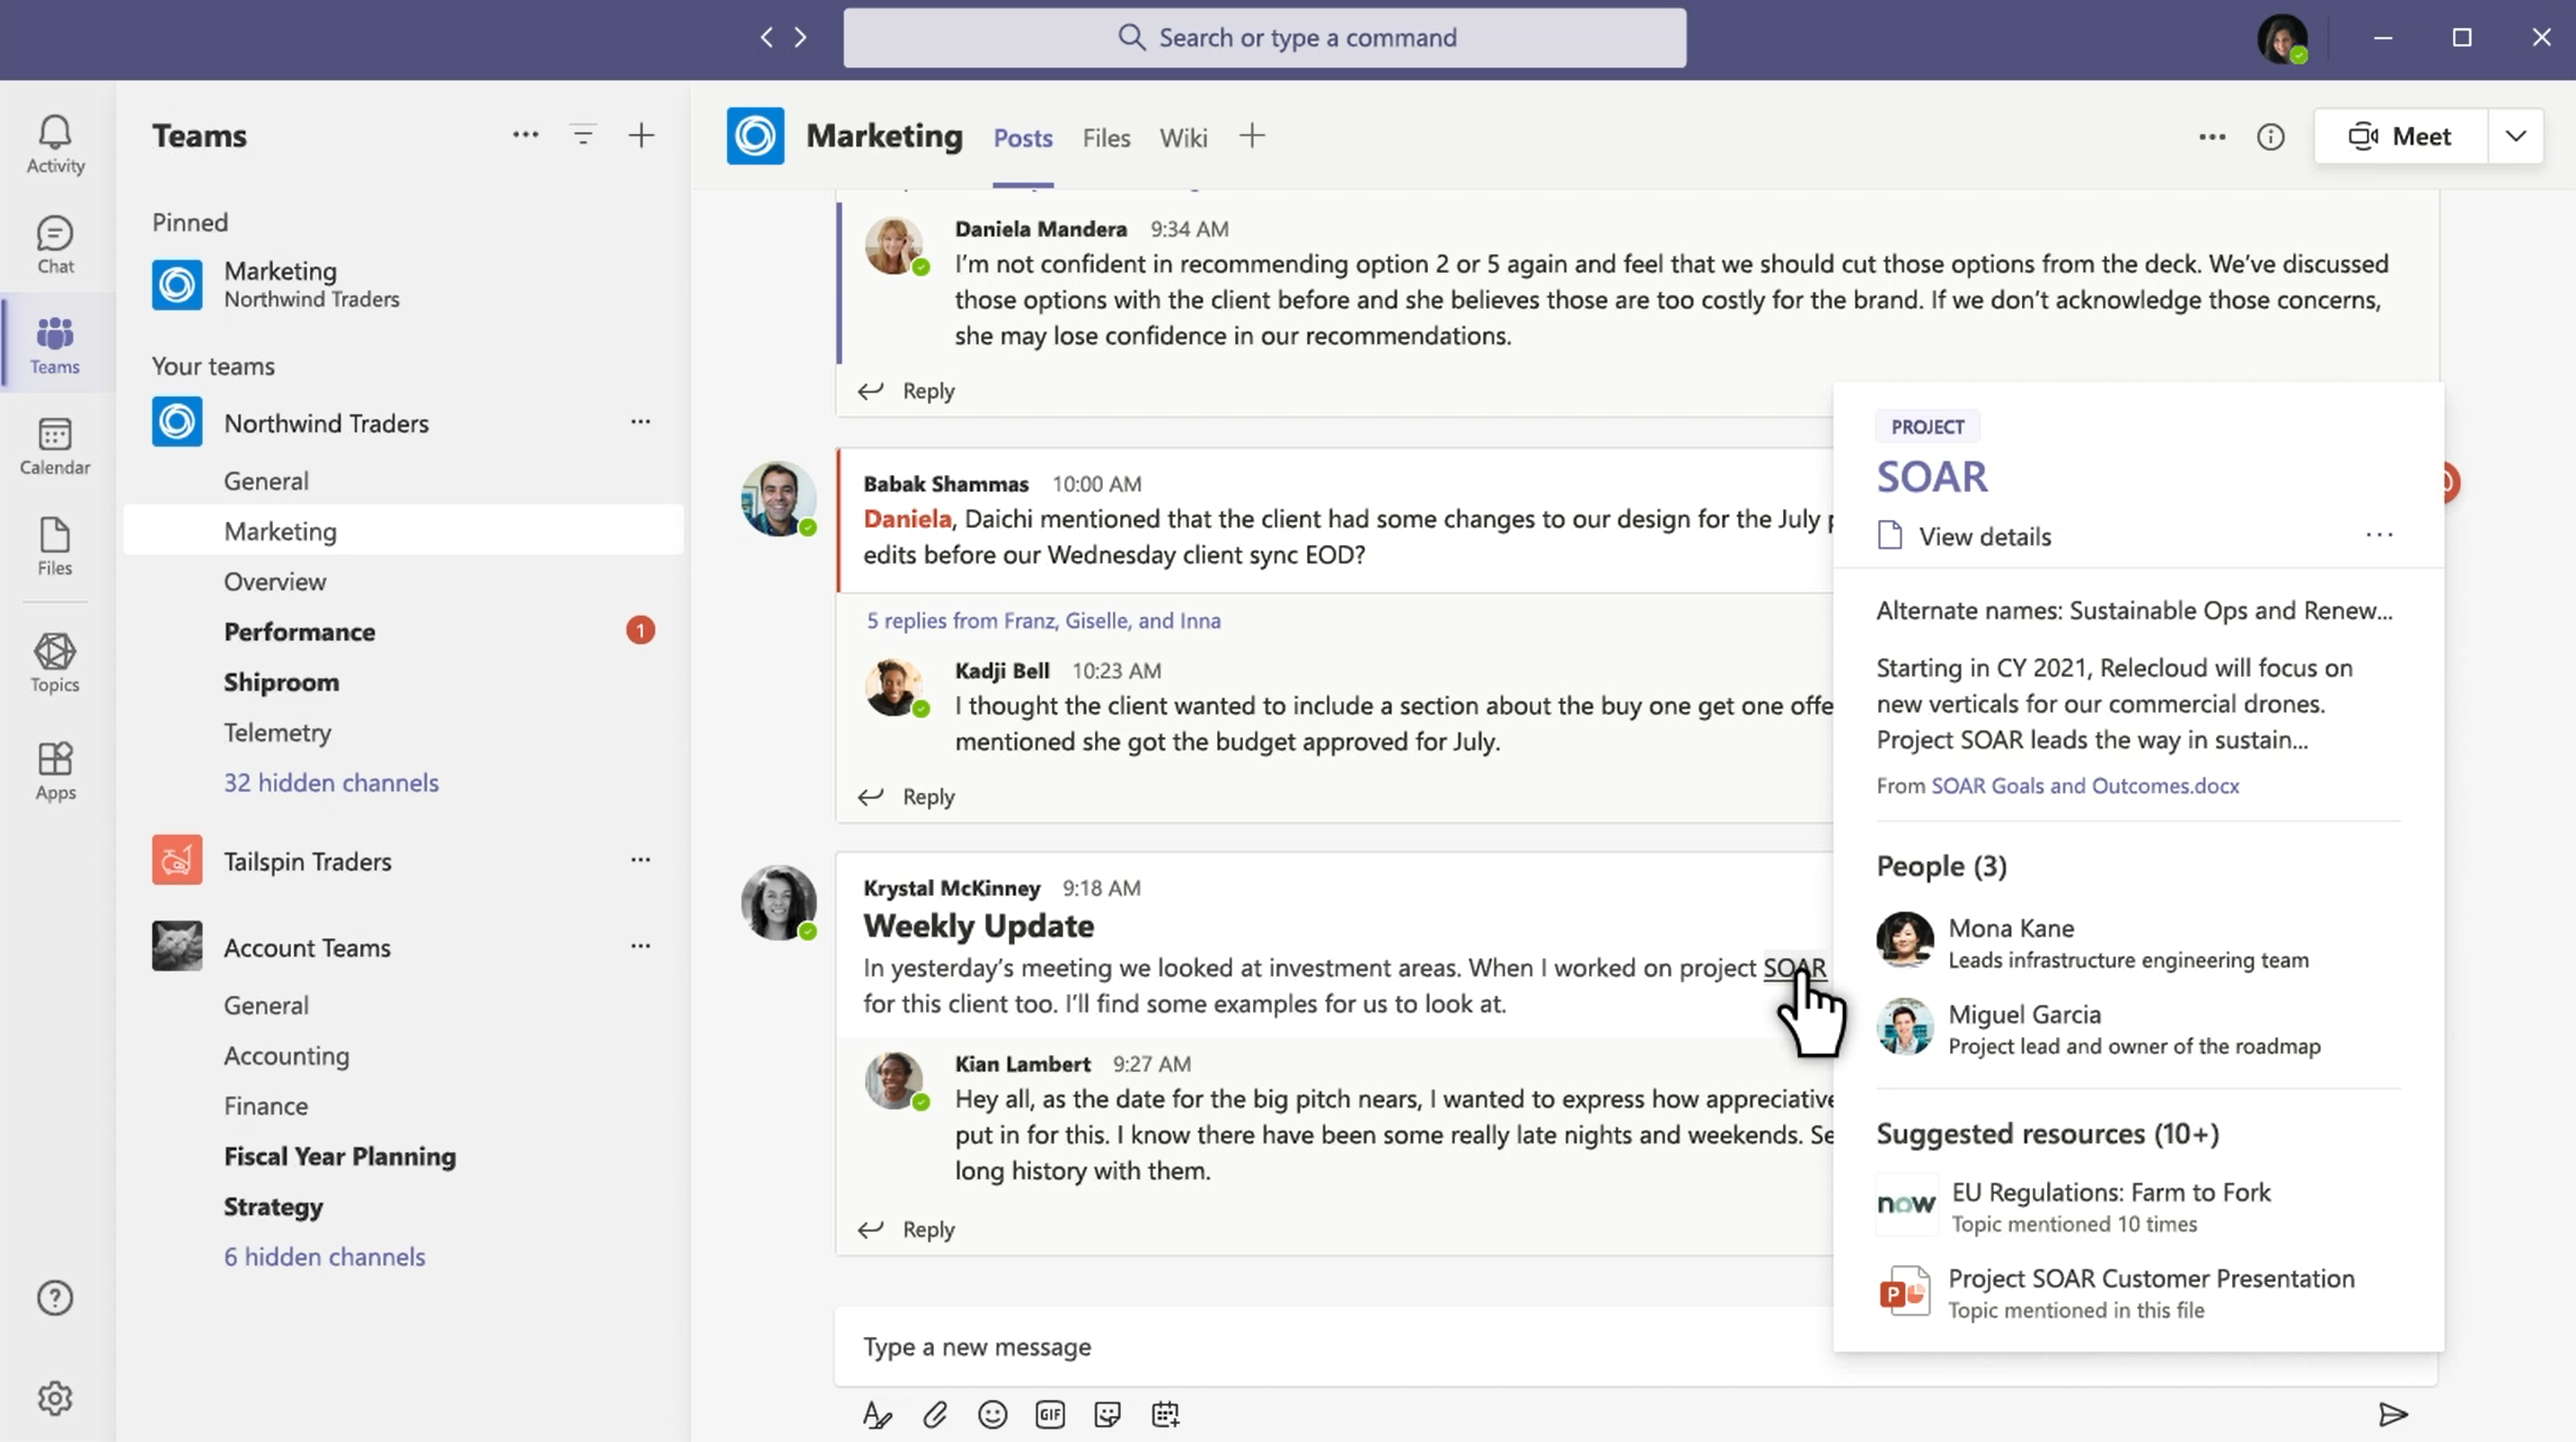 A screenshot of Microsoft Teams that shows how a topic card shows up when highlighting a topic. In this case, the user highlighted a topic called SOAR. The topic card displays key information and links about the topic.